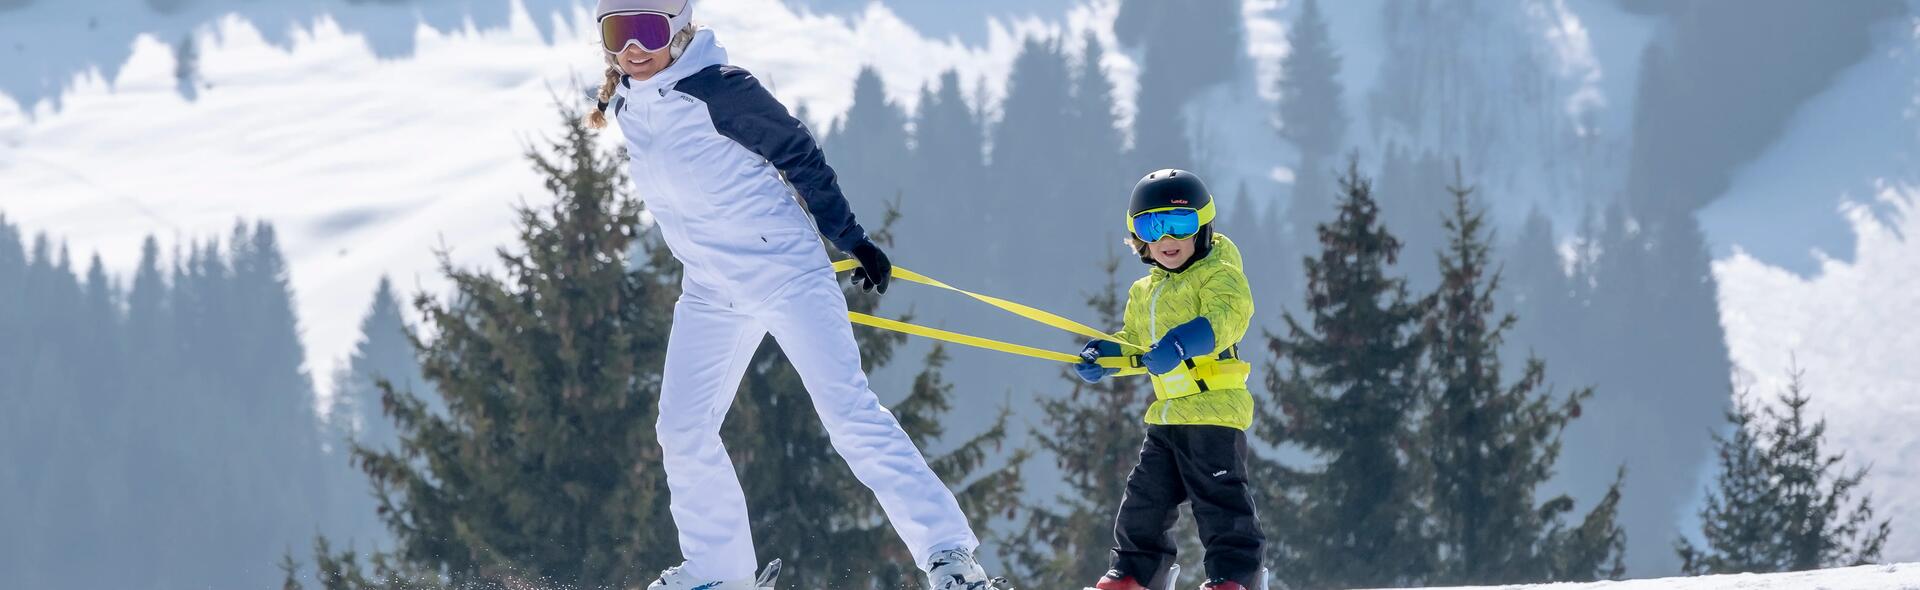 How do you use the children's ski initiation harness? 